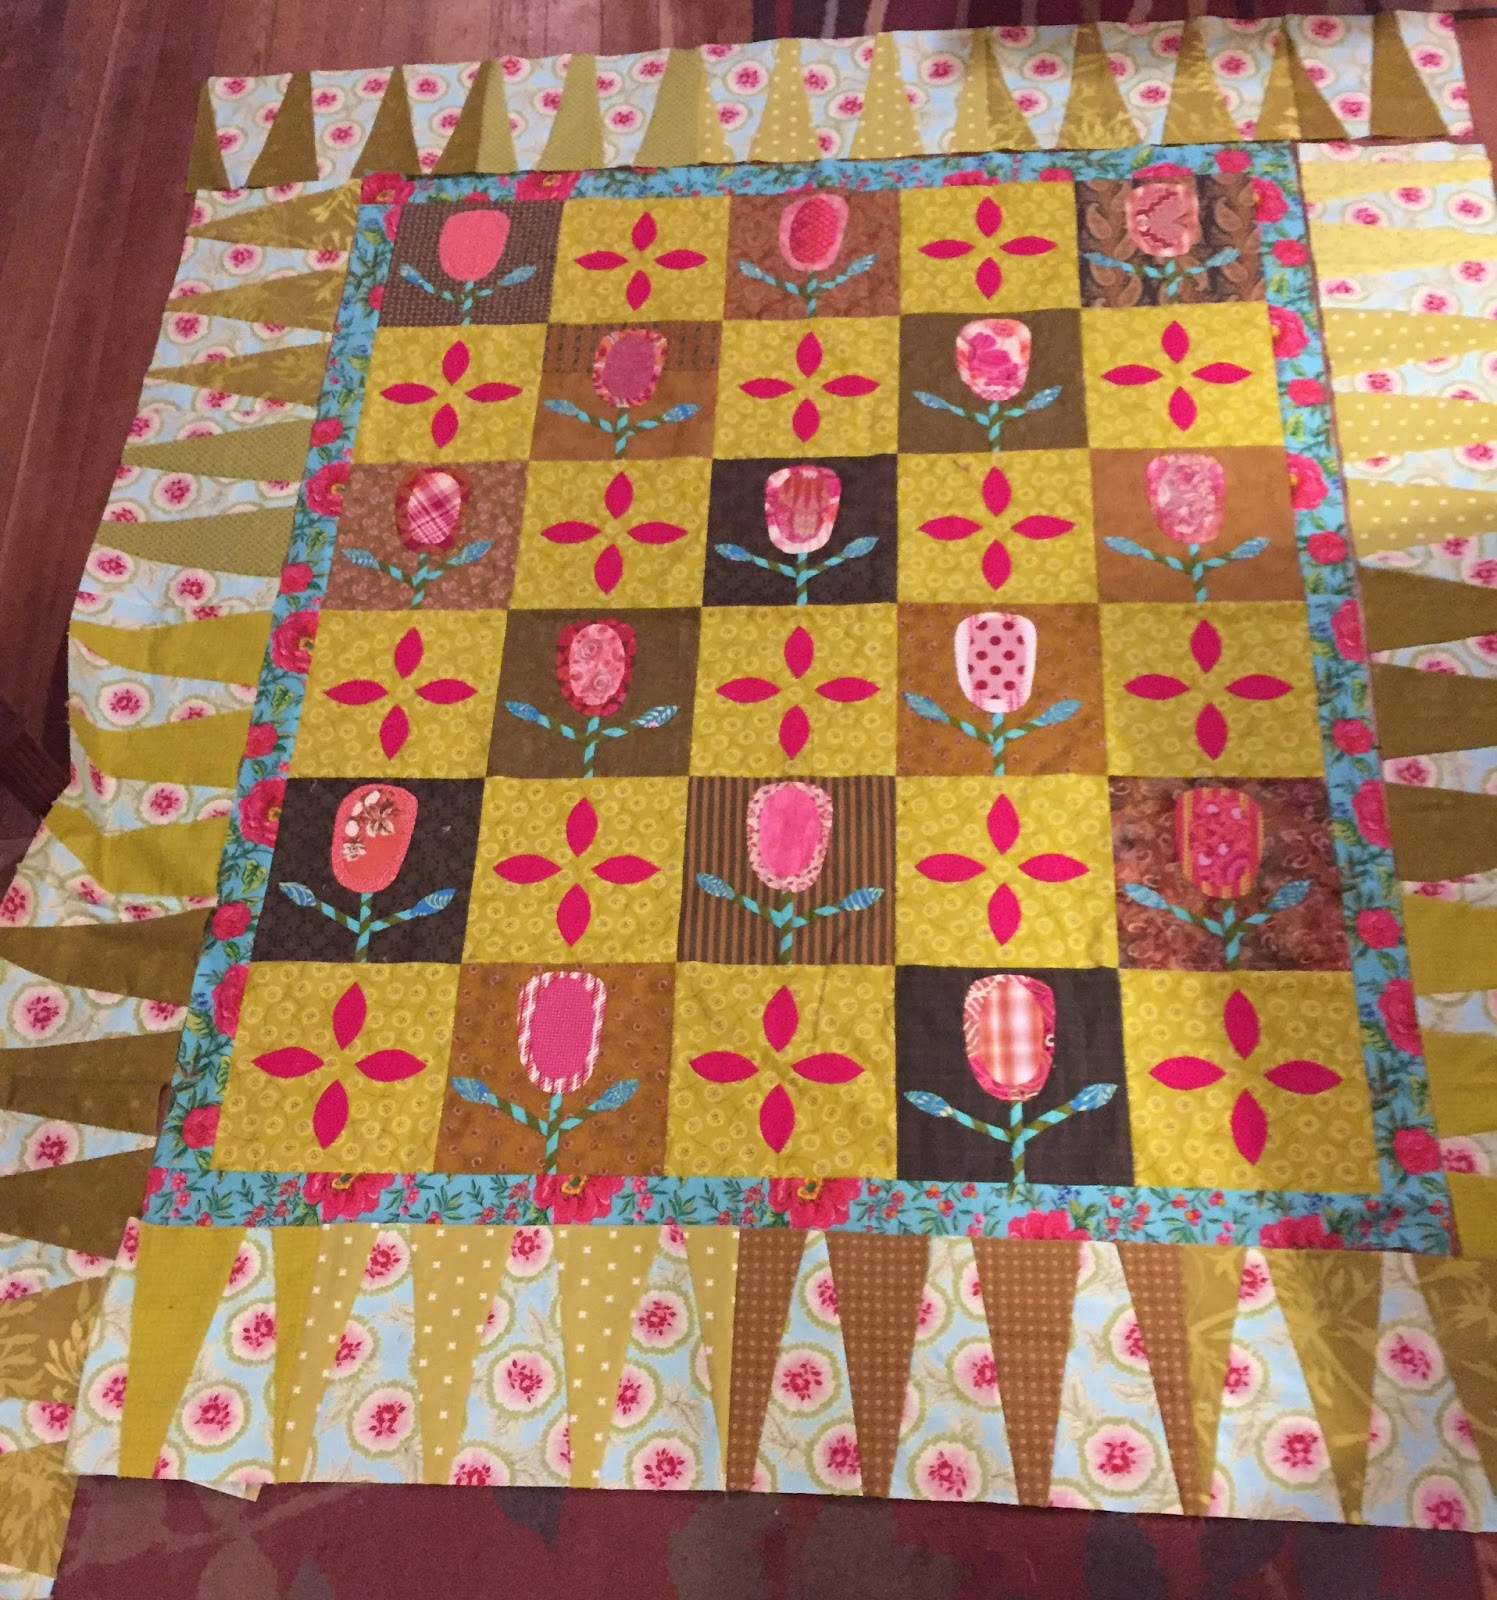 Quilty Folk: Hey Grandma! A Finished Quilt Top